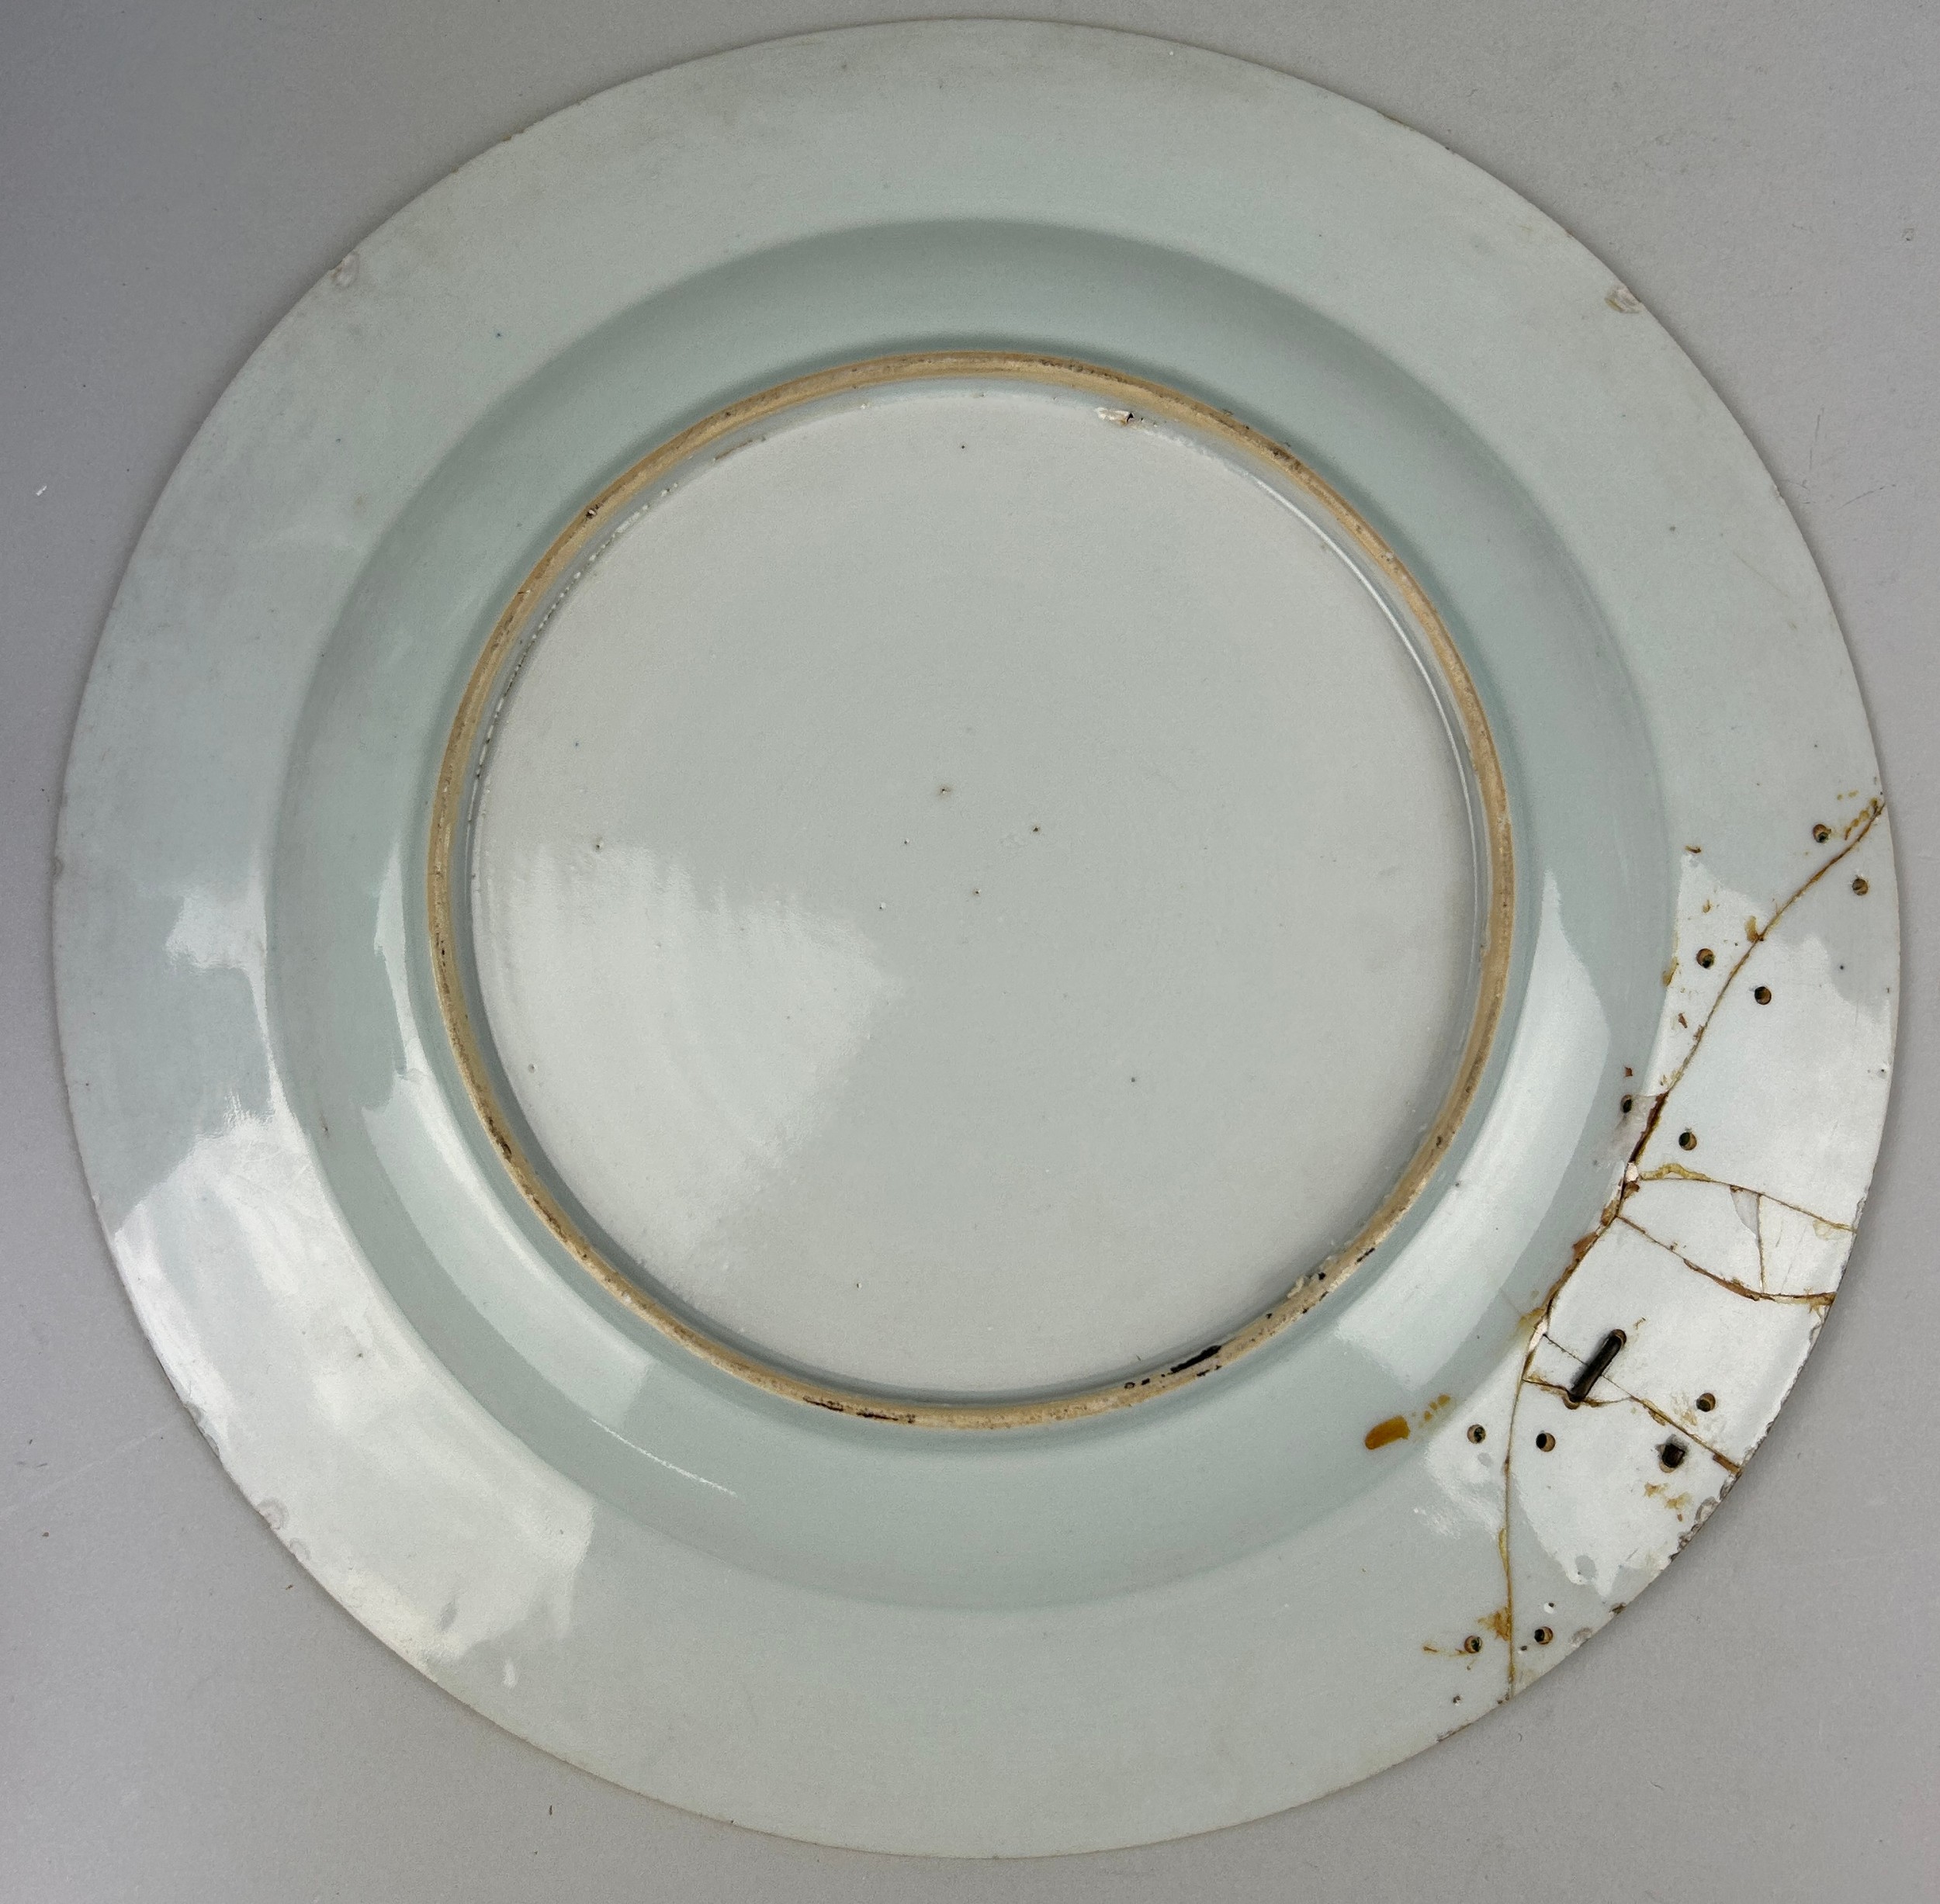 AN 18TH CENTURY CHINESE BLUE AND WHITE PORCELAIN DISH DECORATED WITH FOLIAGE AND ARCHAIC URNS WITH - Image 2 of 2